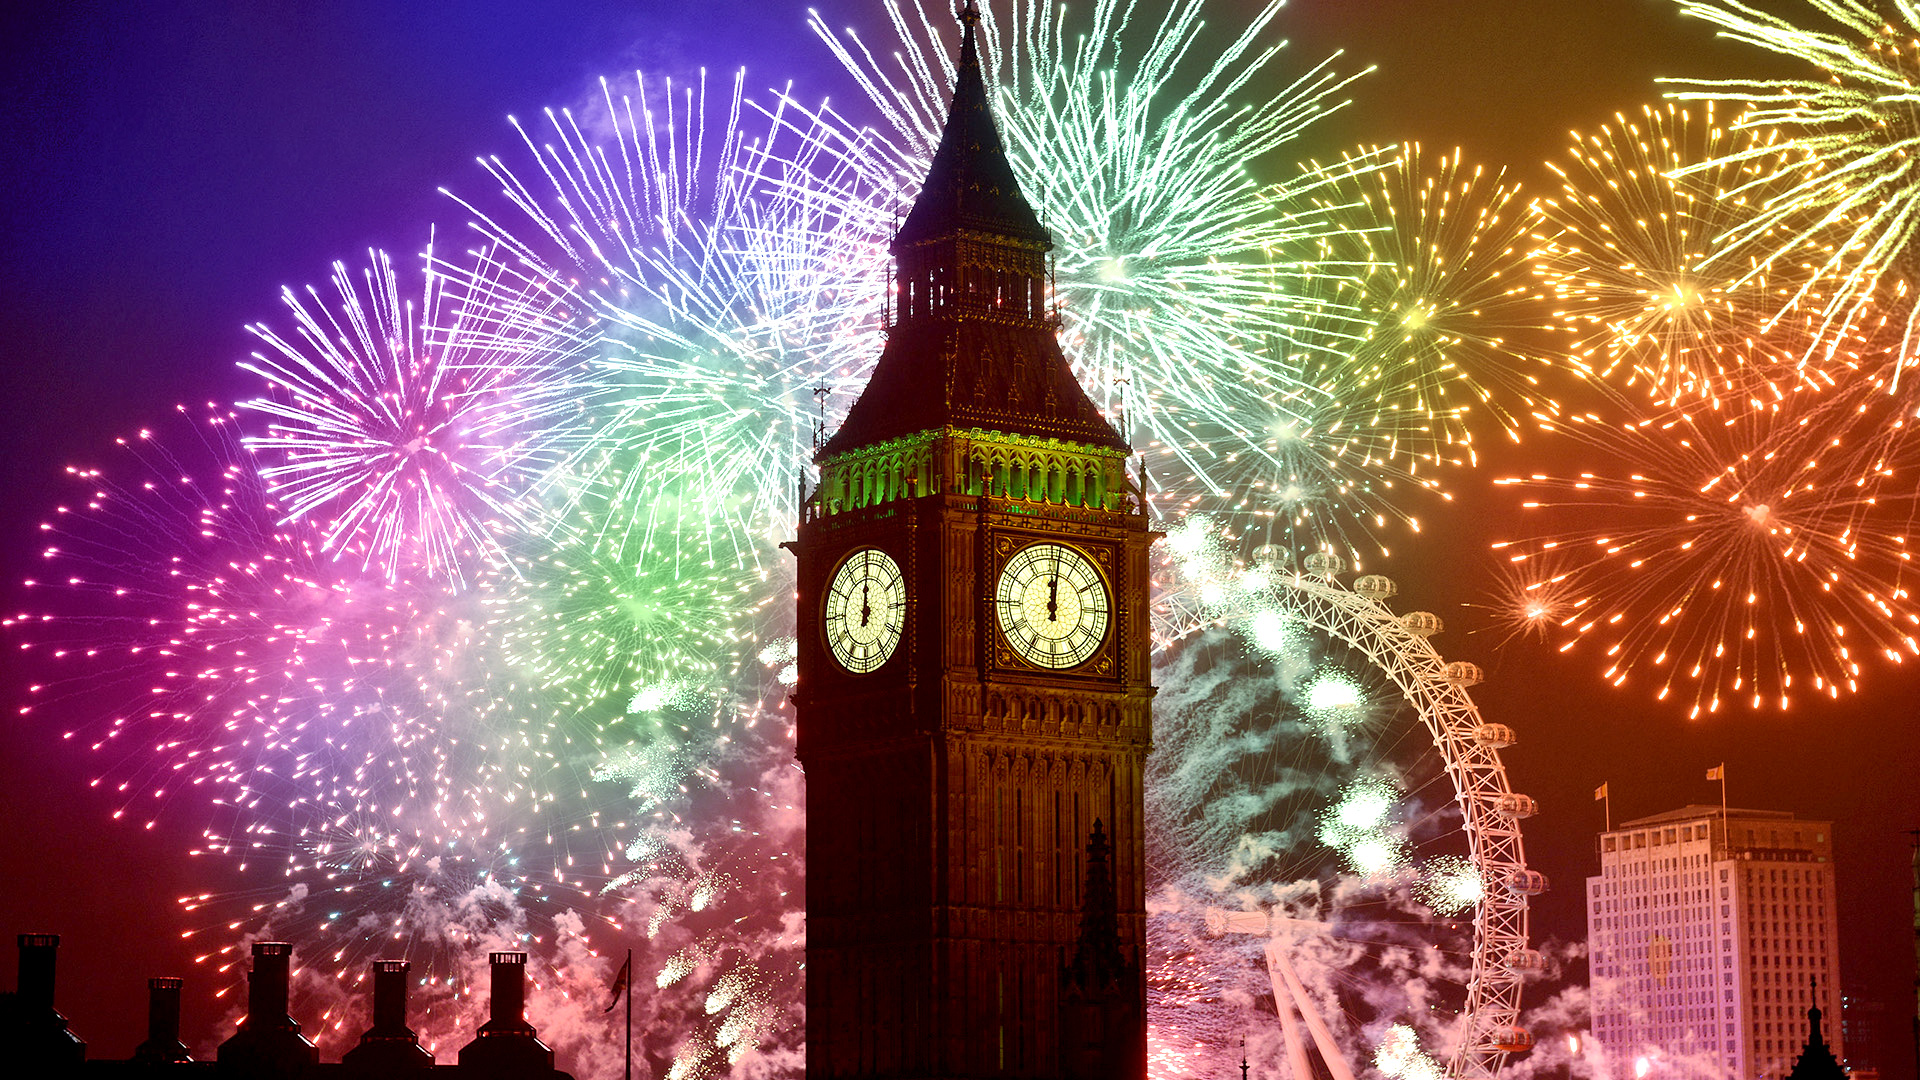 Big ben with colorful fireworks in London